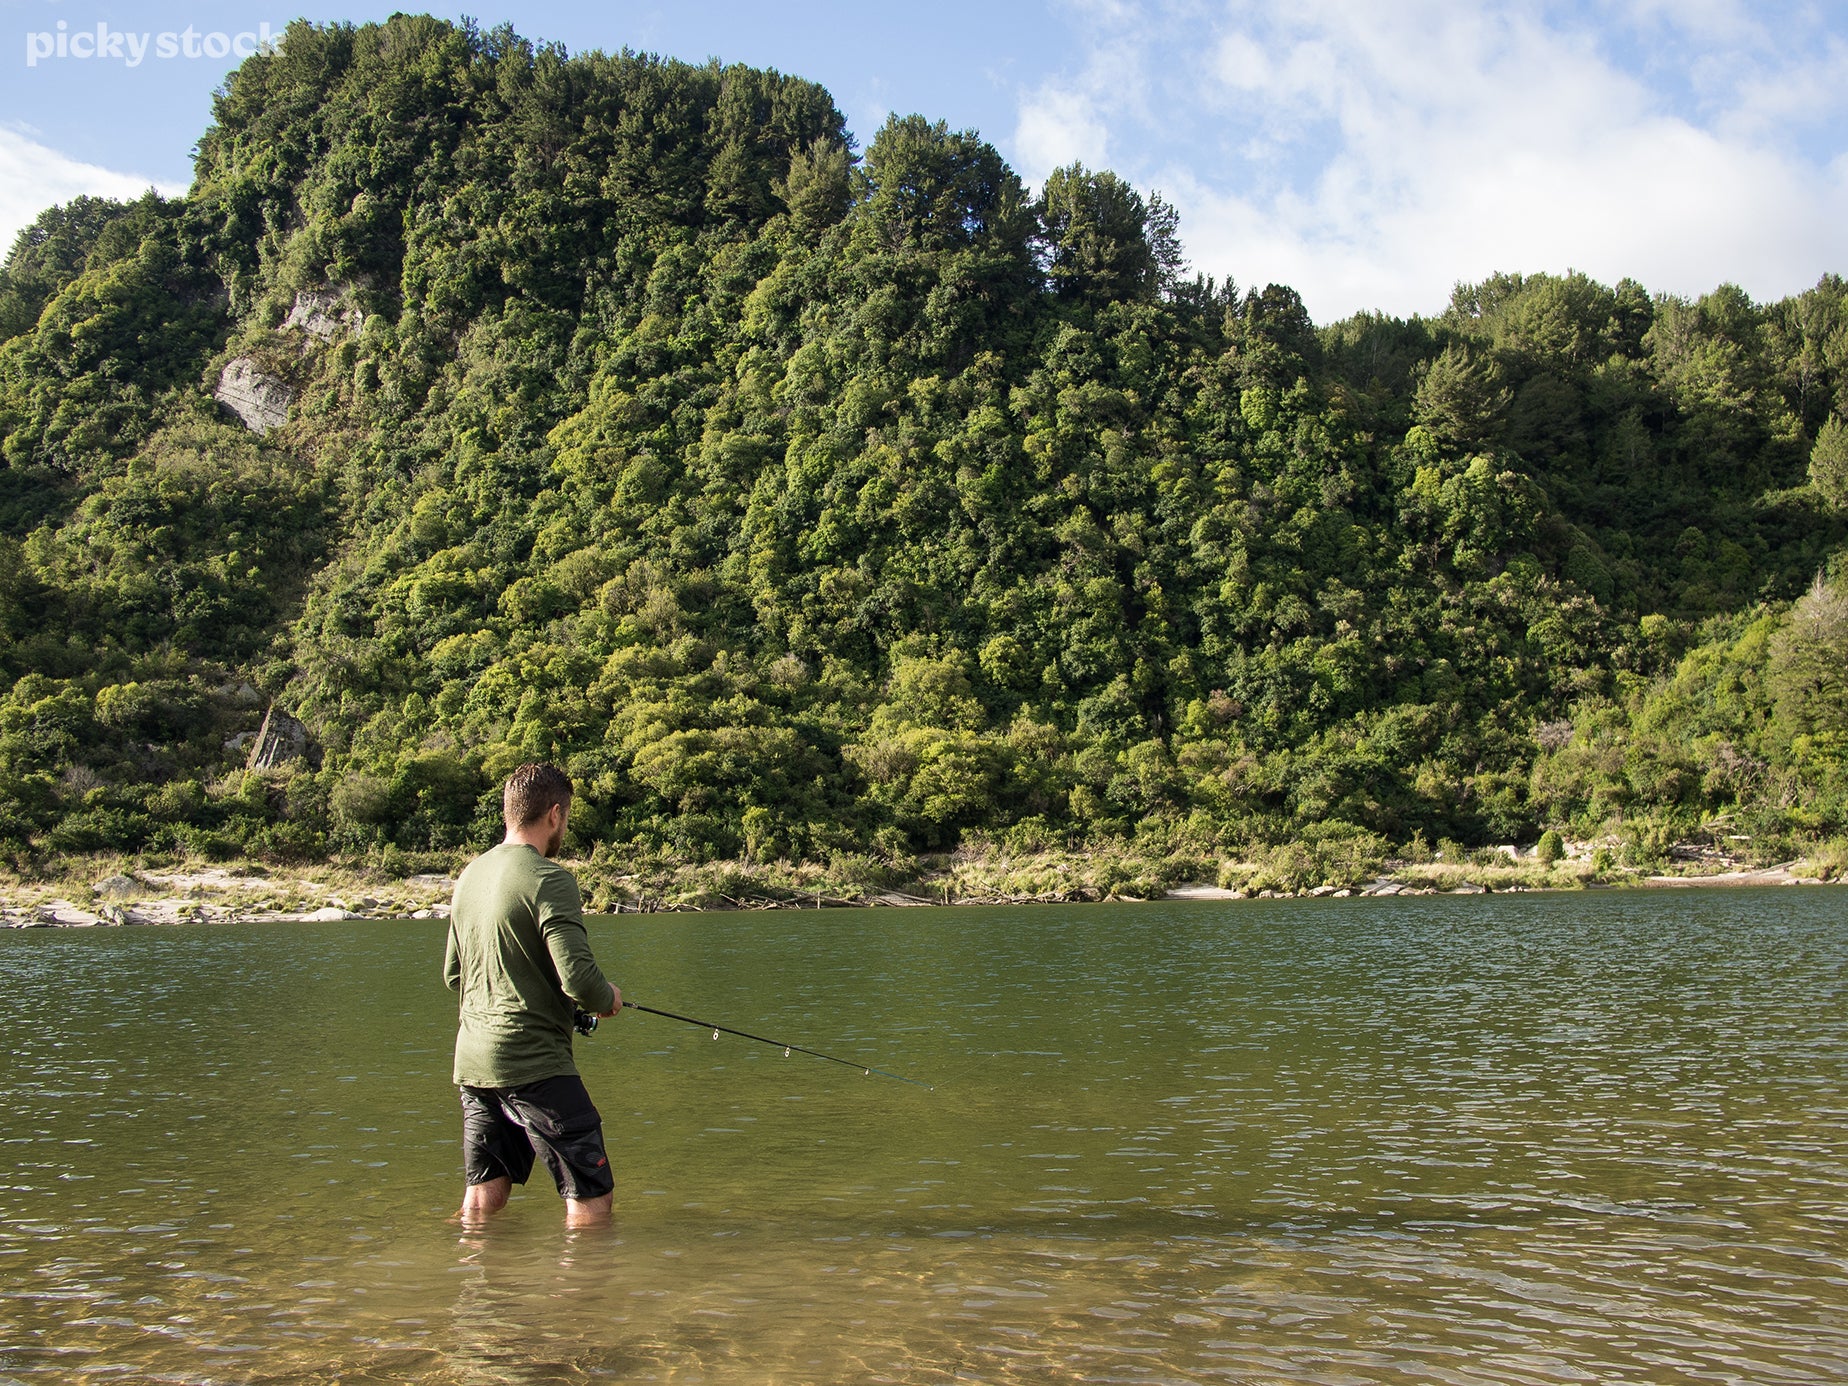 A landscape of a man fishing in a wild stream. His dark shorts are drenched with water and his fishing pole is angled down in anticipation. The water is murky green and reflex the bevy of trees that coat the hillside.